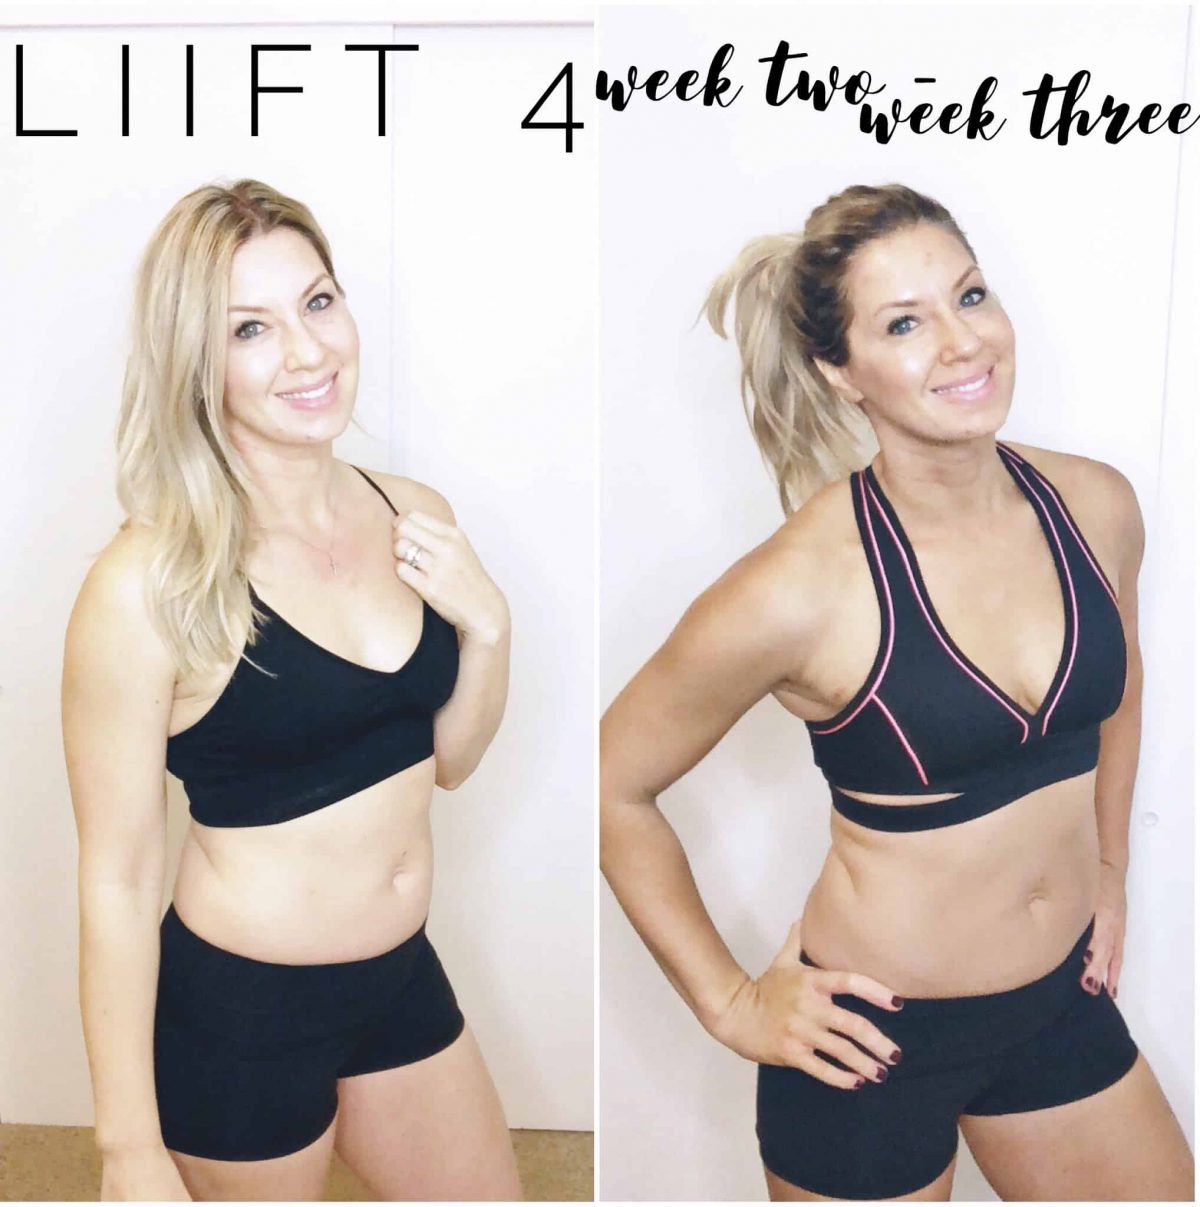 Week Three Liift 4 Review - A Mom's Weight Loss Transformation! 